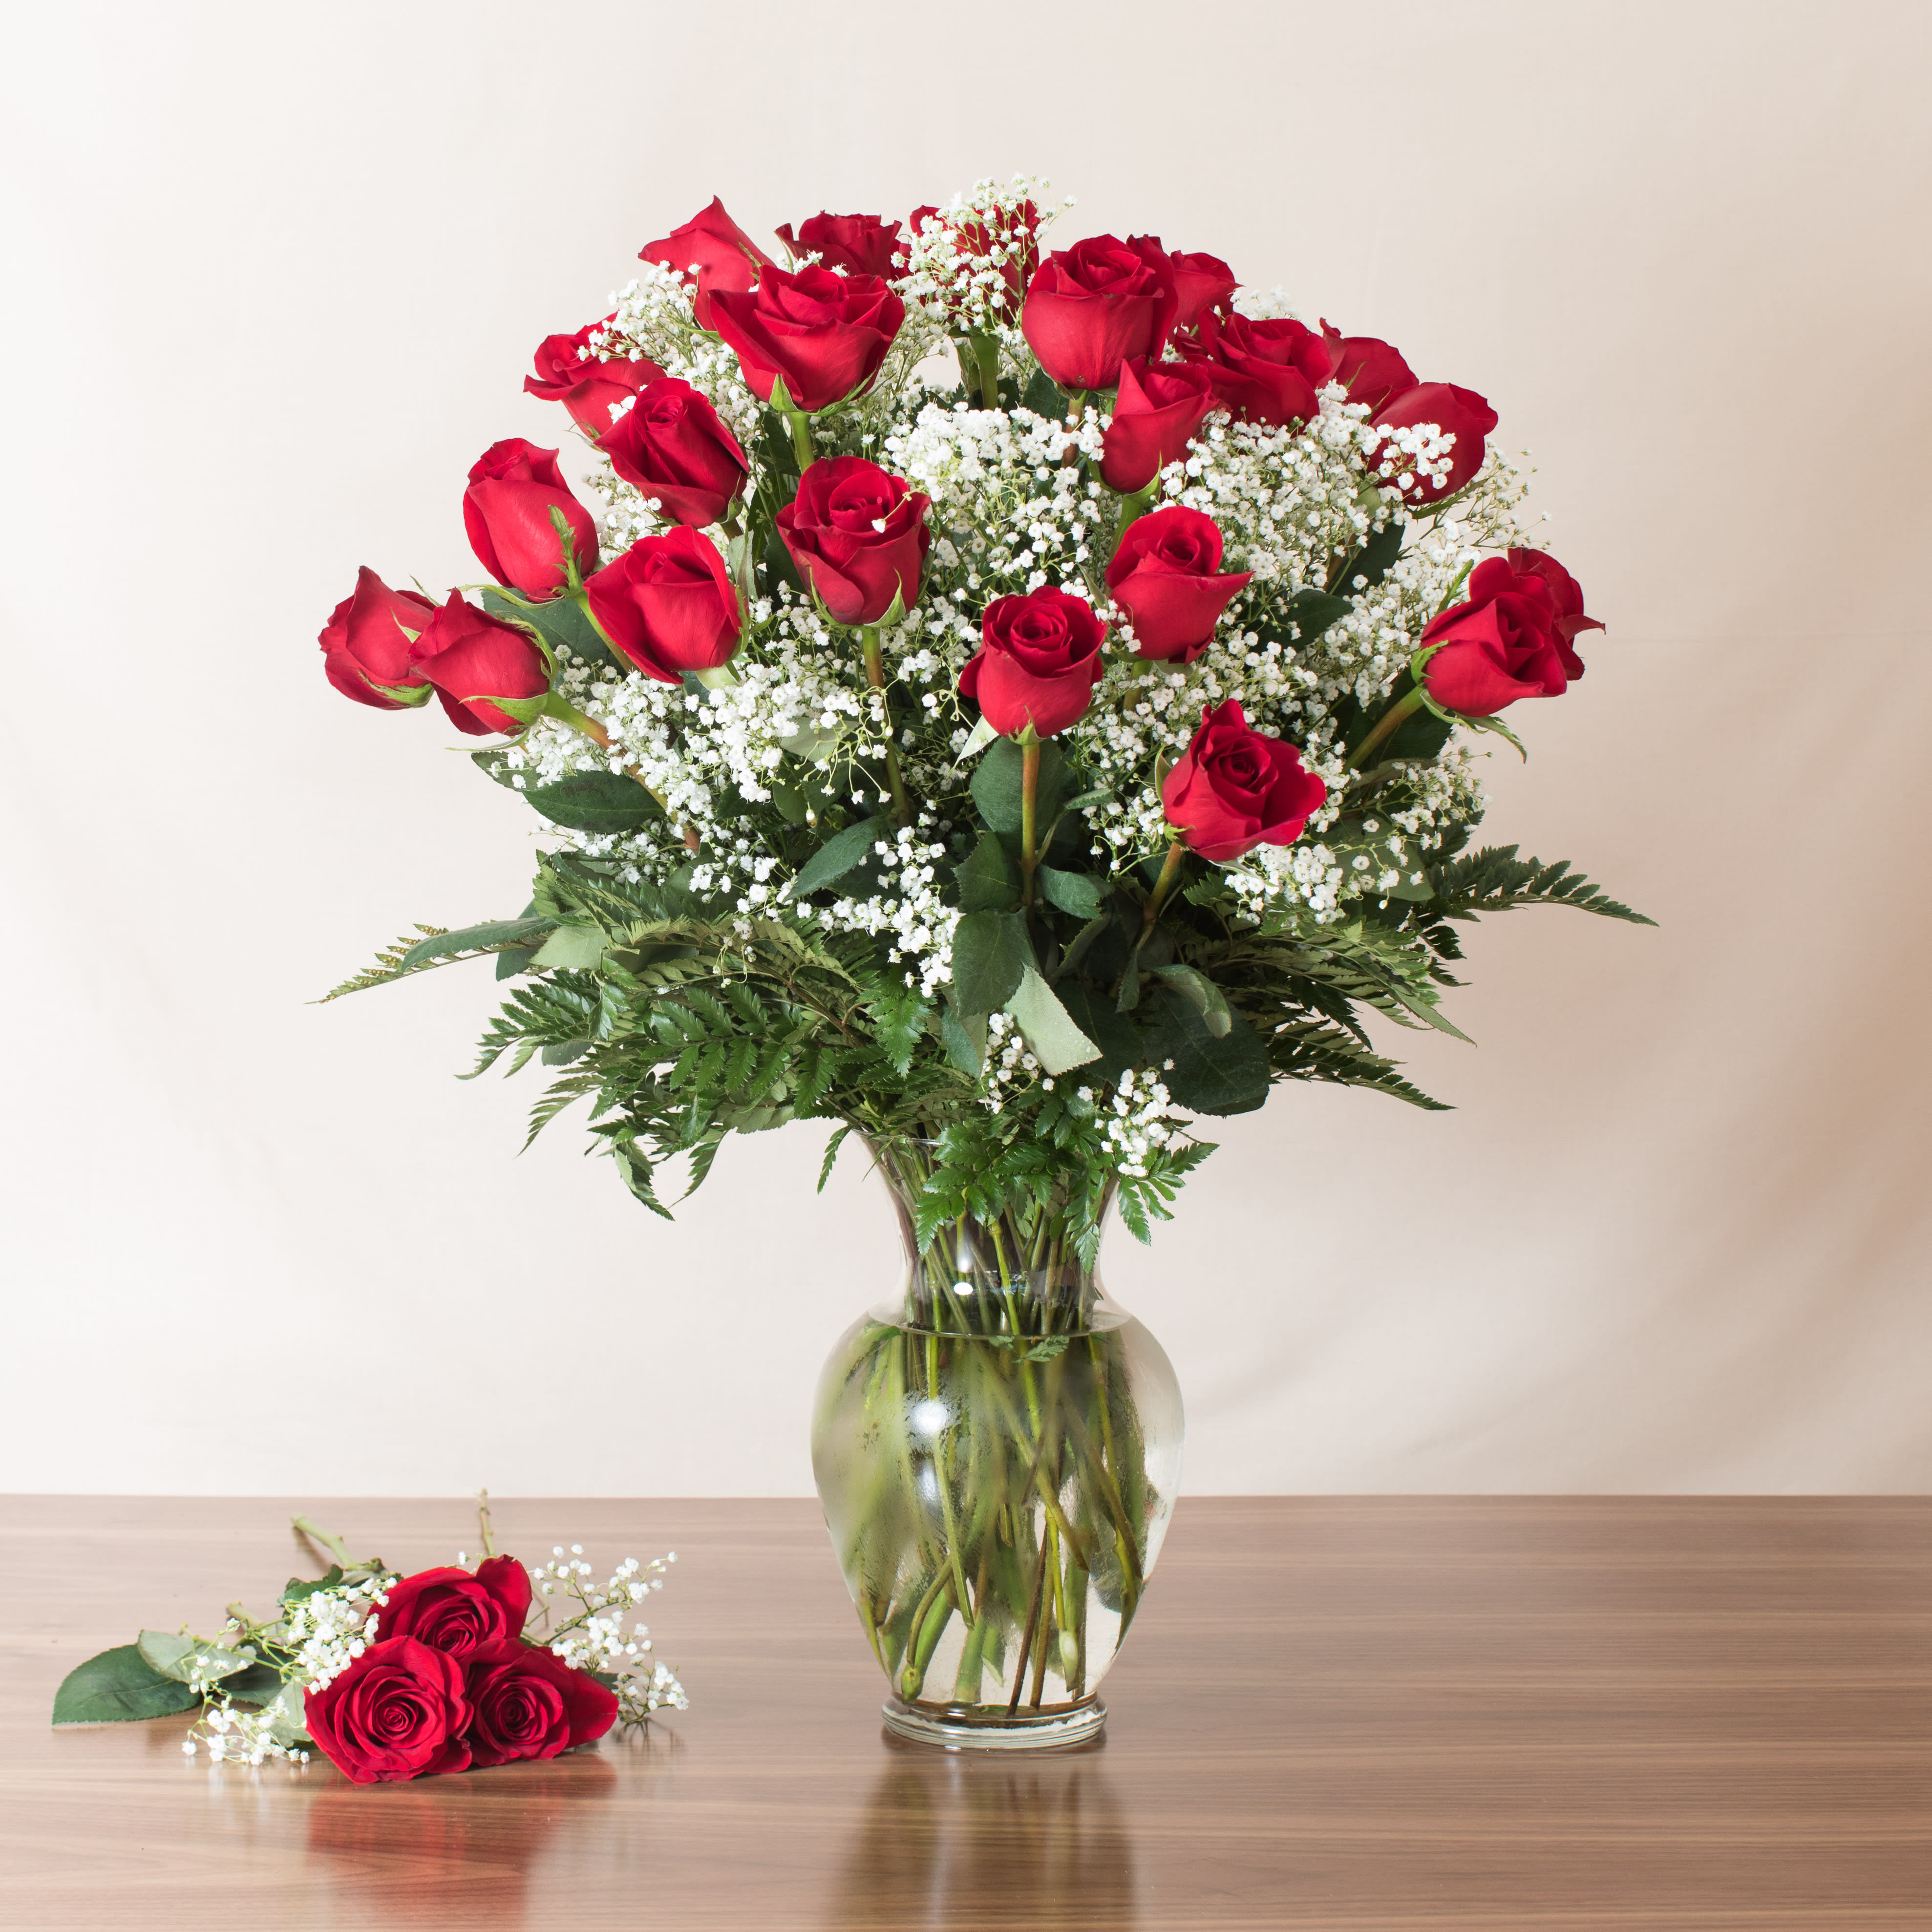 2 Dozen Red Masterpiece (Premium Roses)  - Enjoy 2 dozen premium South American long stem roses in the gorgeous piece!!!  Full and beautiful and accented with gorgeous greens!